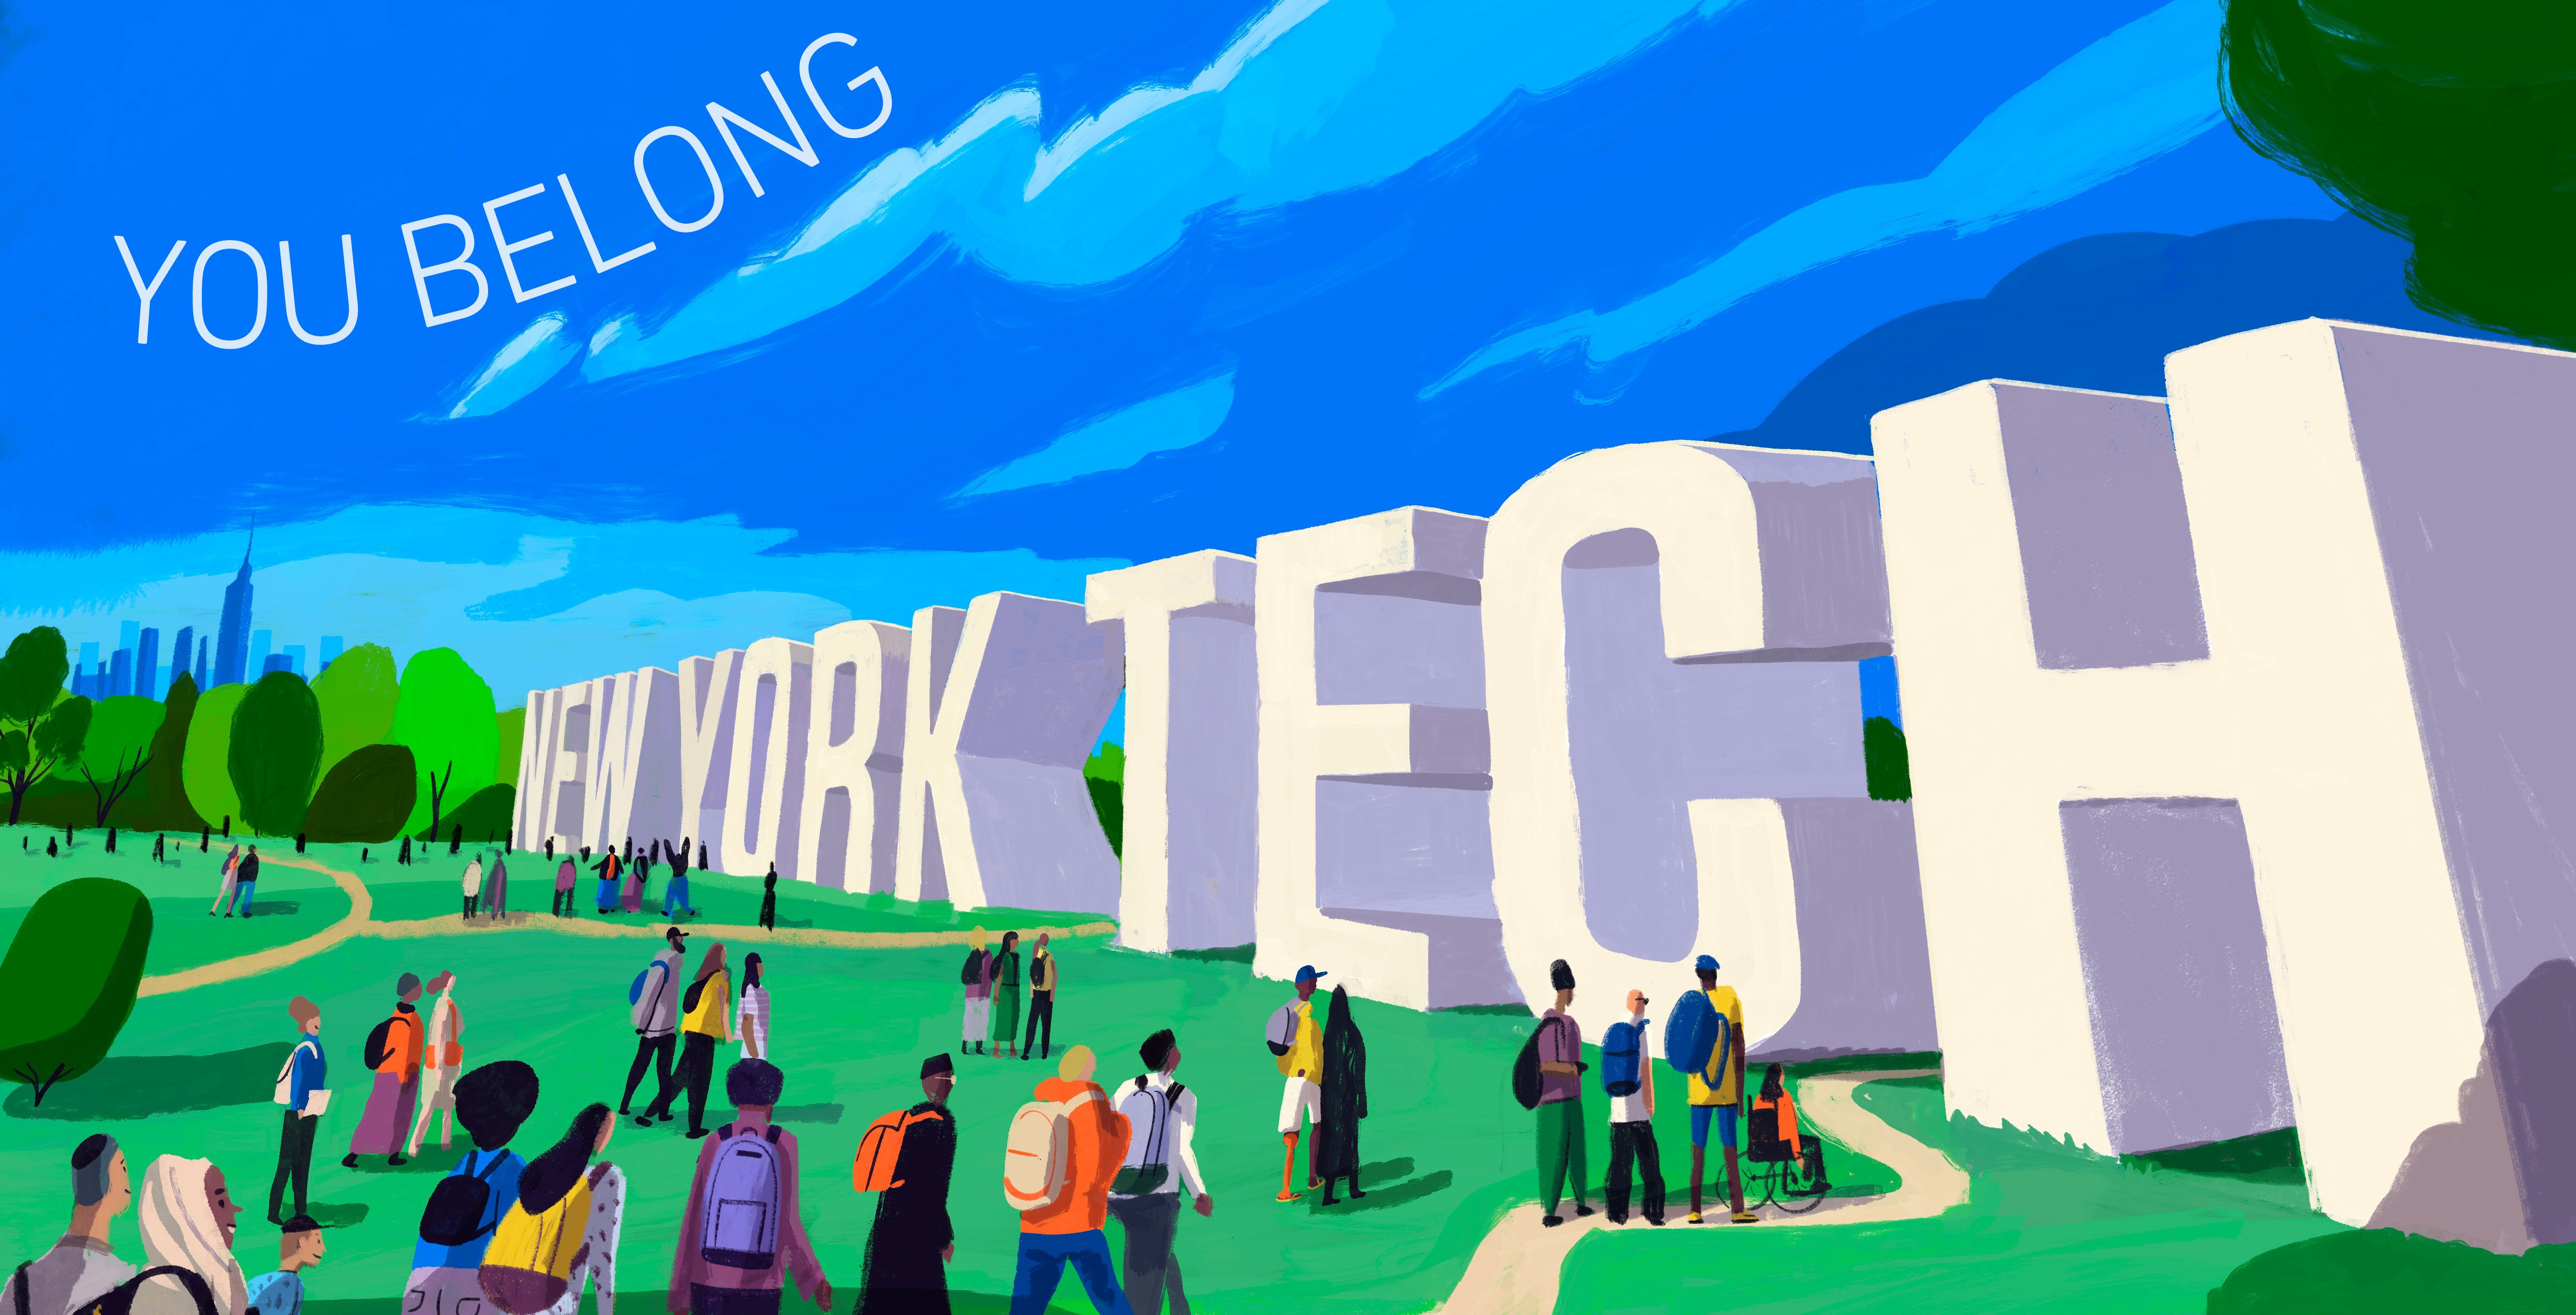 Groups of people in park near large letters of New York Tech Logo